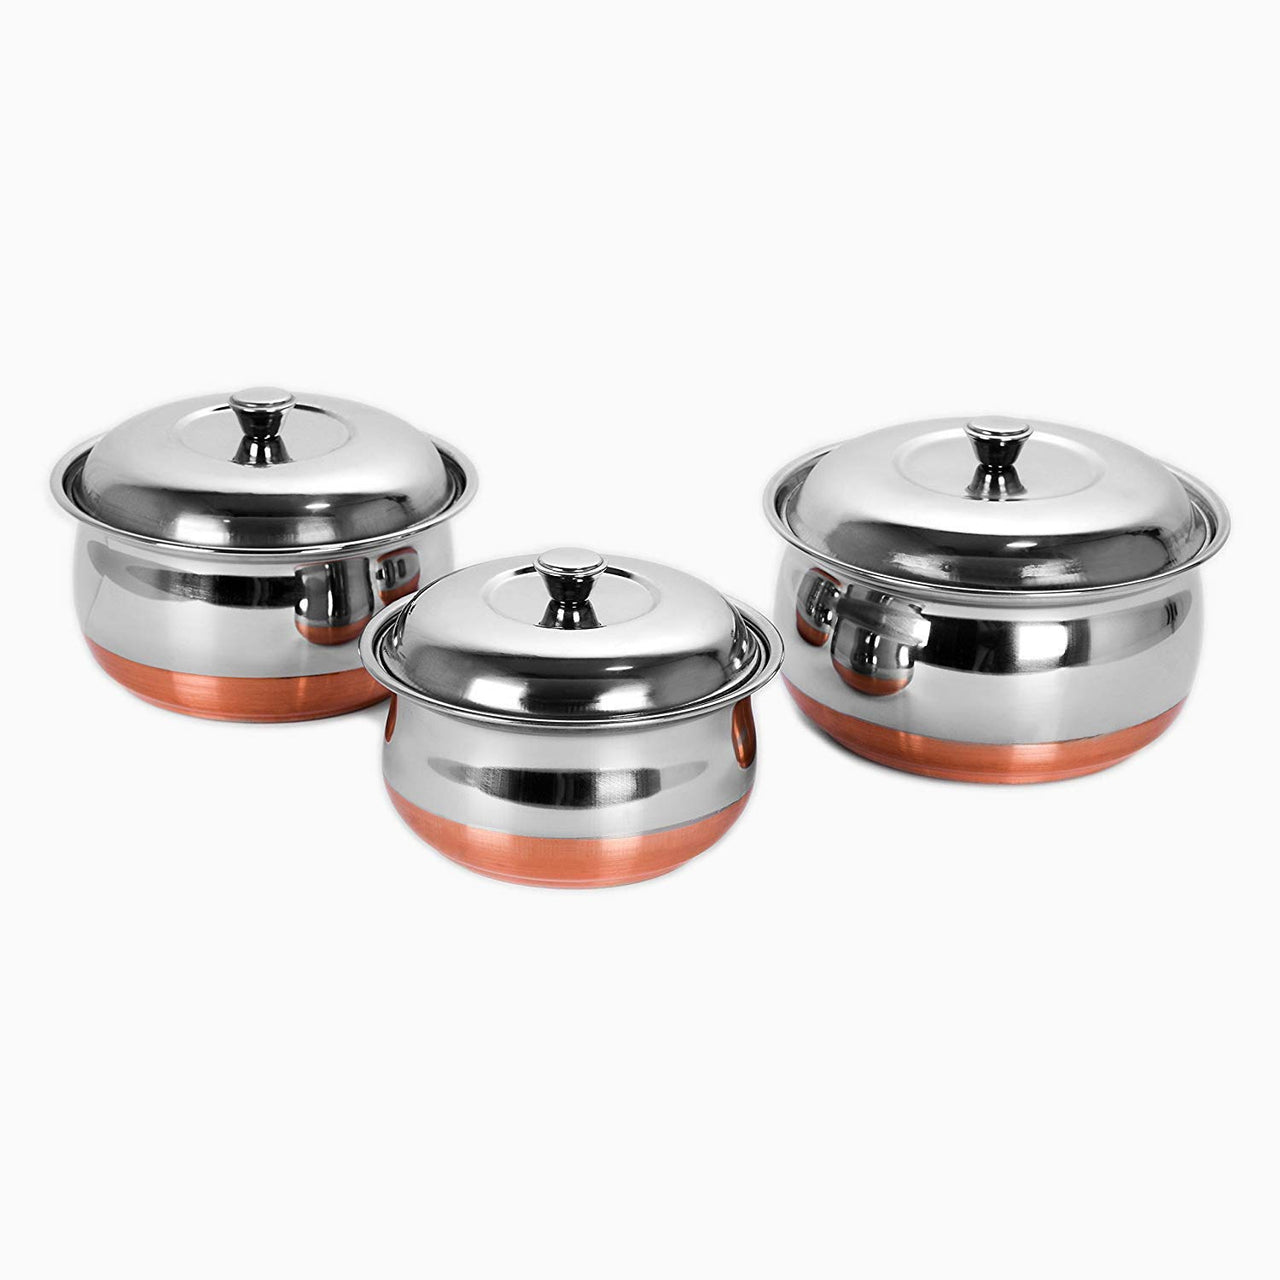 Stainless Steel Copper Bottom Multipurpose Cook & Serve Handi With Lid - Set of 3